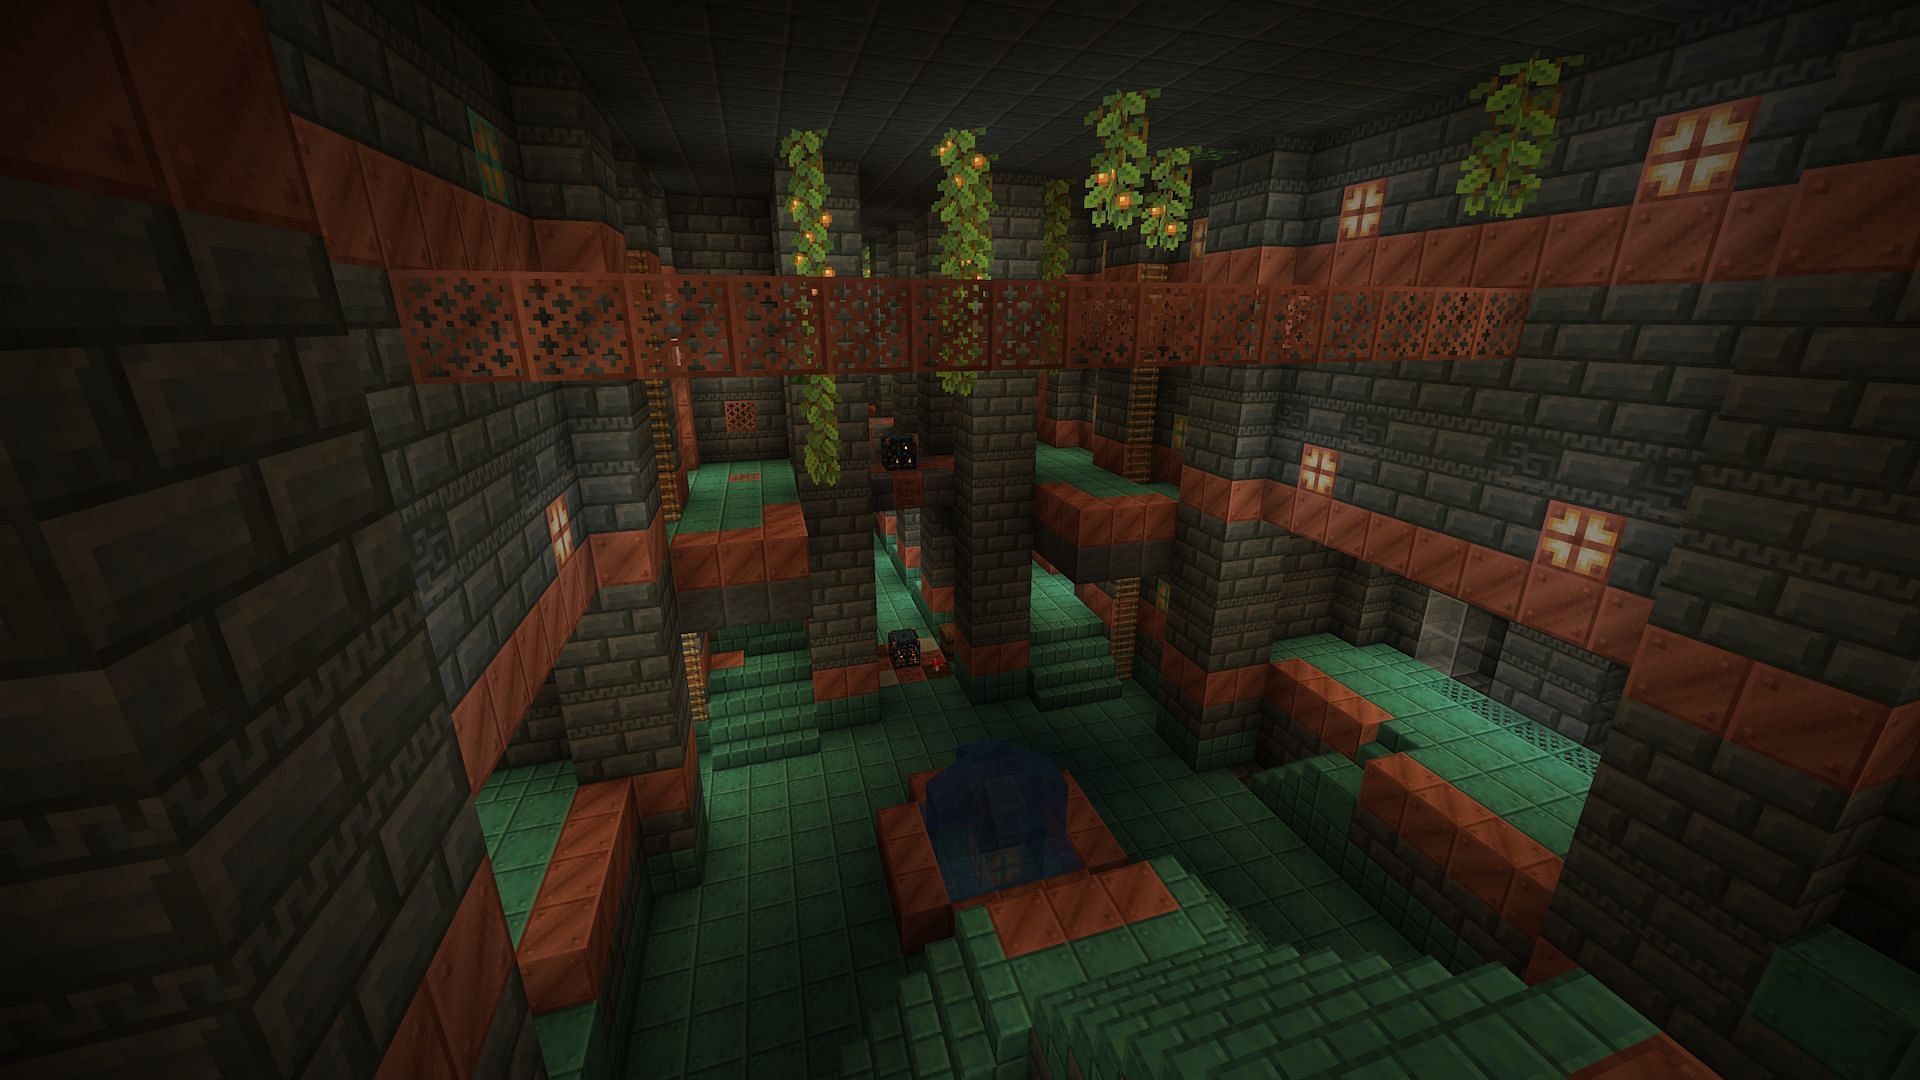 Trial chambers are much deadlier with this Preview applied (Image via Mojang)